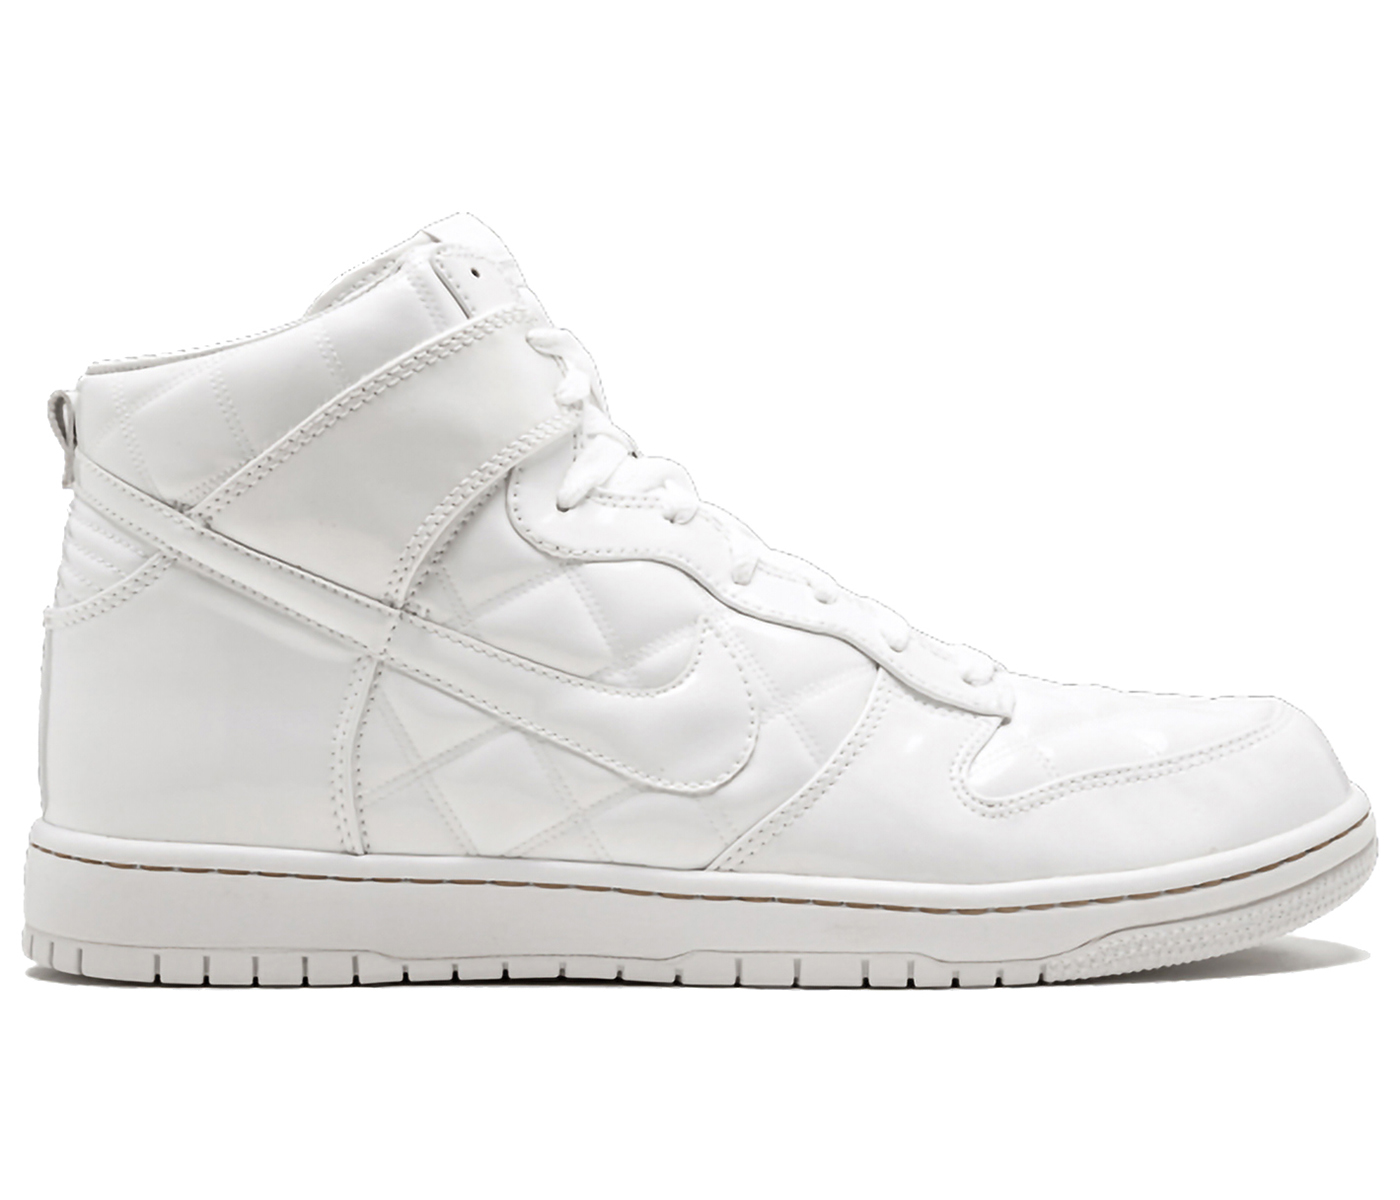 Nike Dunk High Supreme Olympic Octagon Quilted Patent White Men's